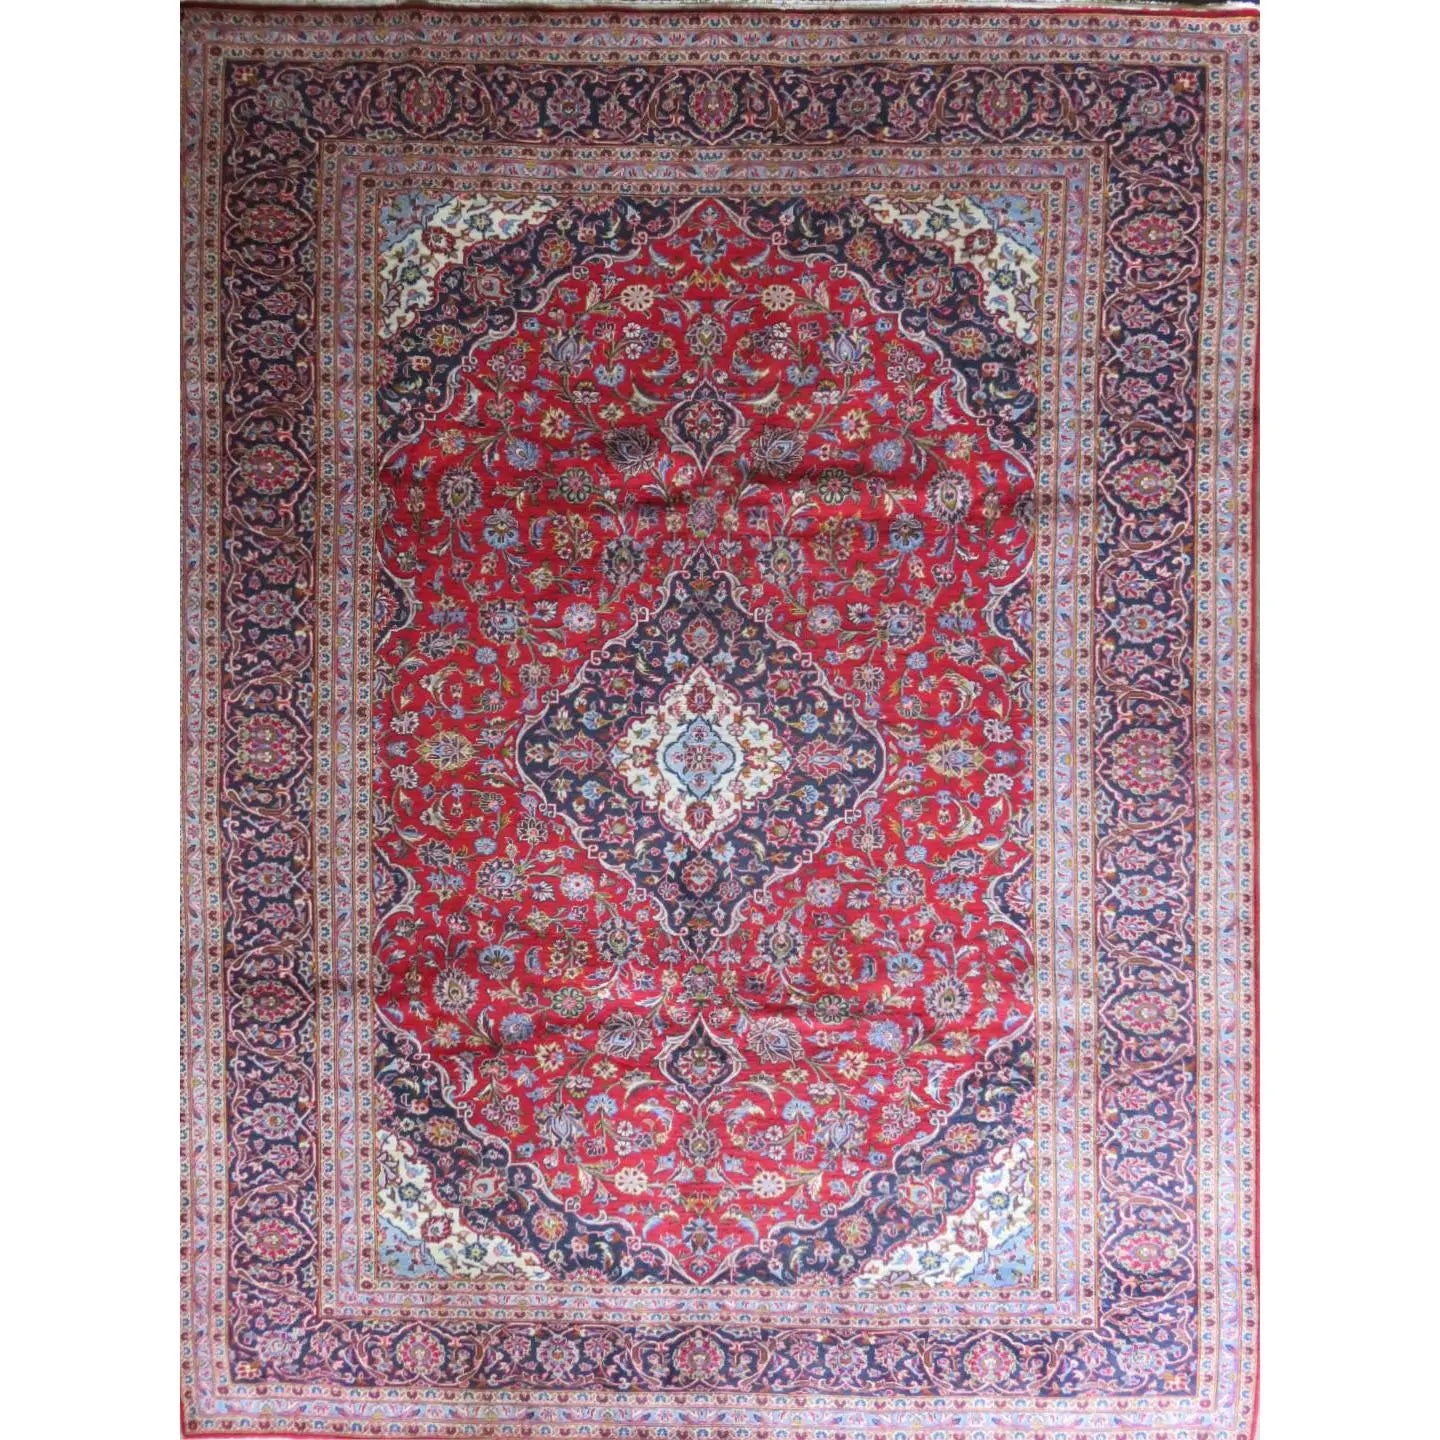 Hand-Knotted Persian Wool Rug _ Luxurious Vintage Design, 13'1" x 9'8", Artisan Crafted